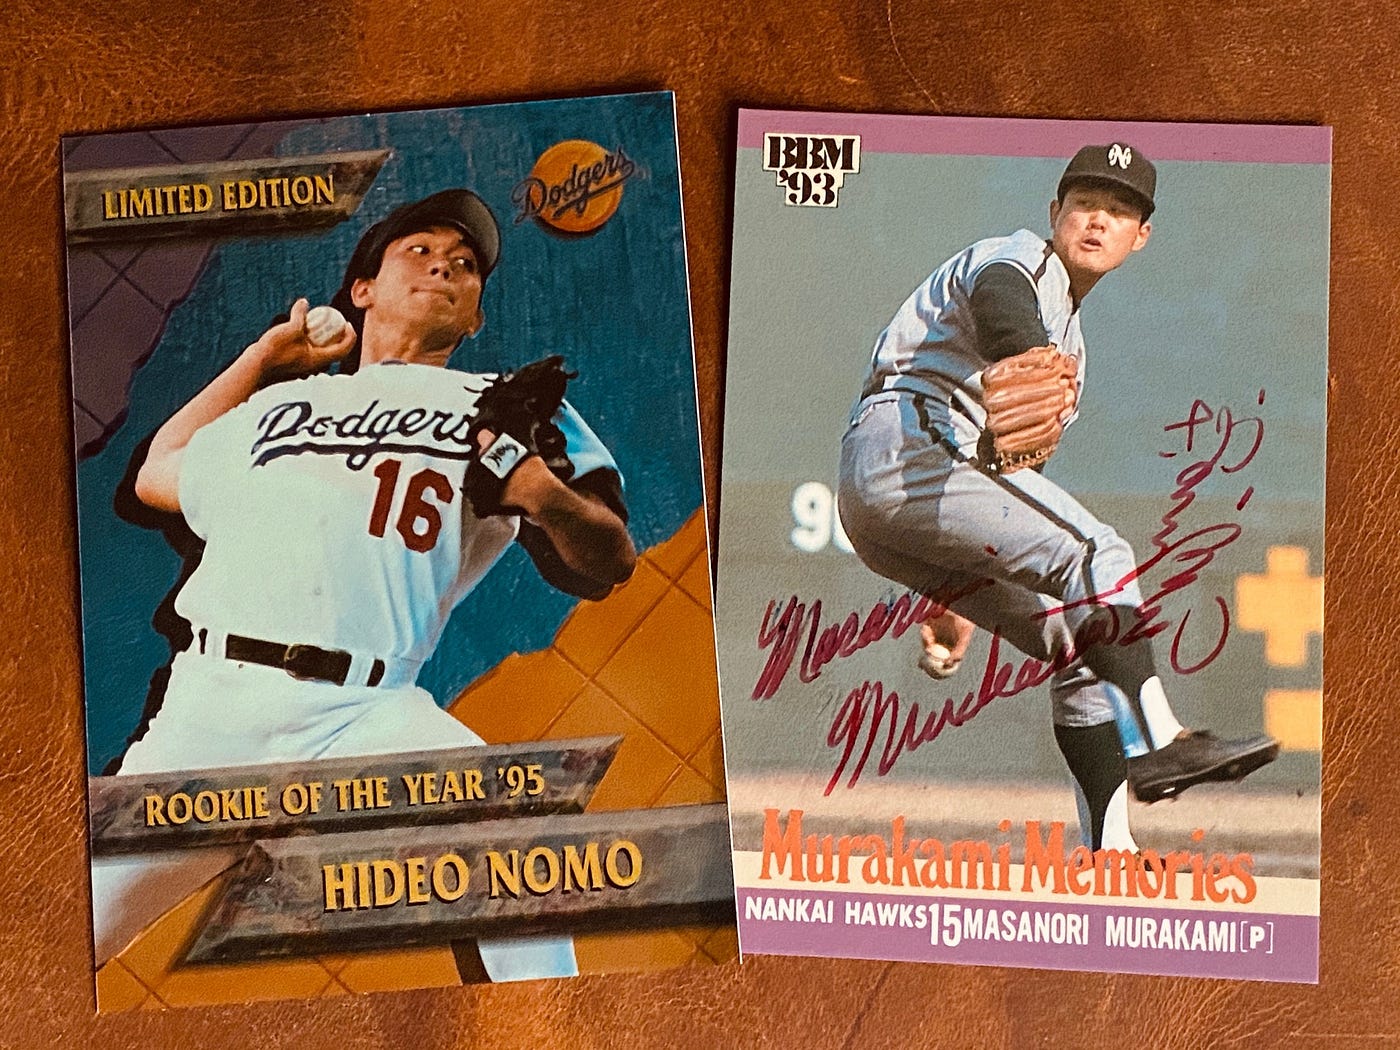 OTD: Nomo's MLB debut. On this day 25 years ago, Hideo Nomo…, by Mark  Langill